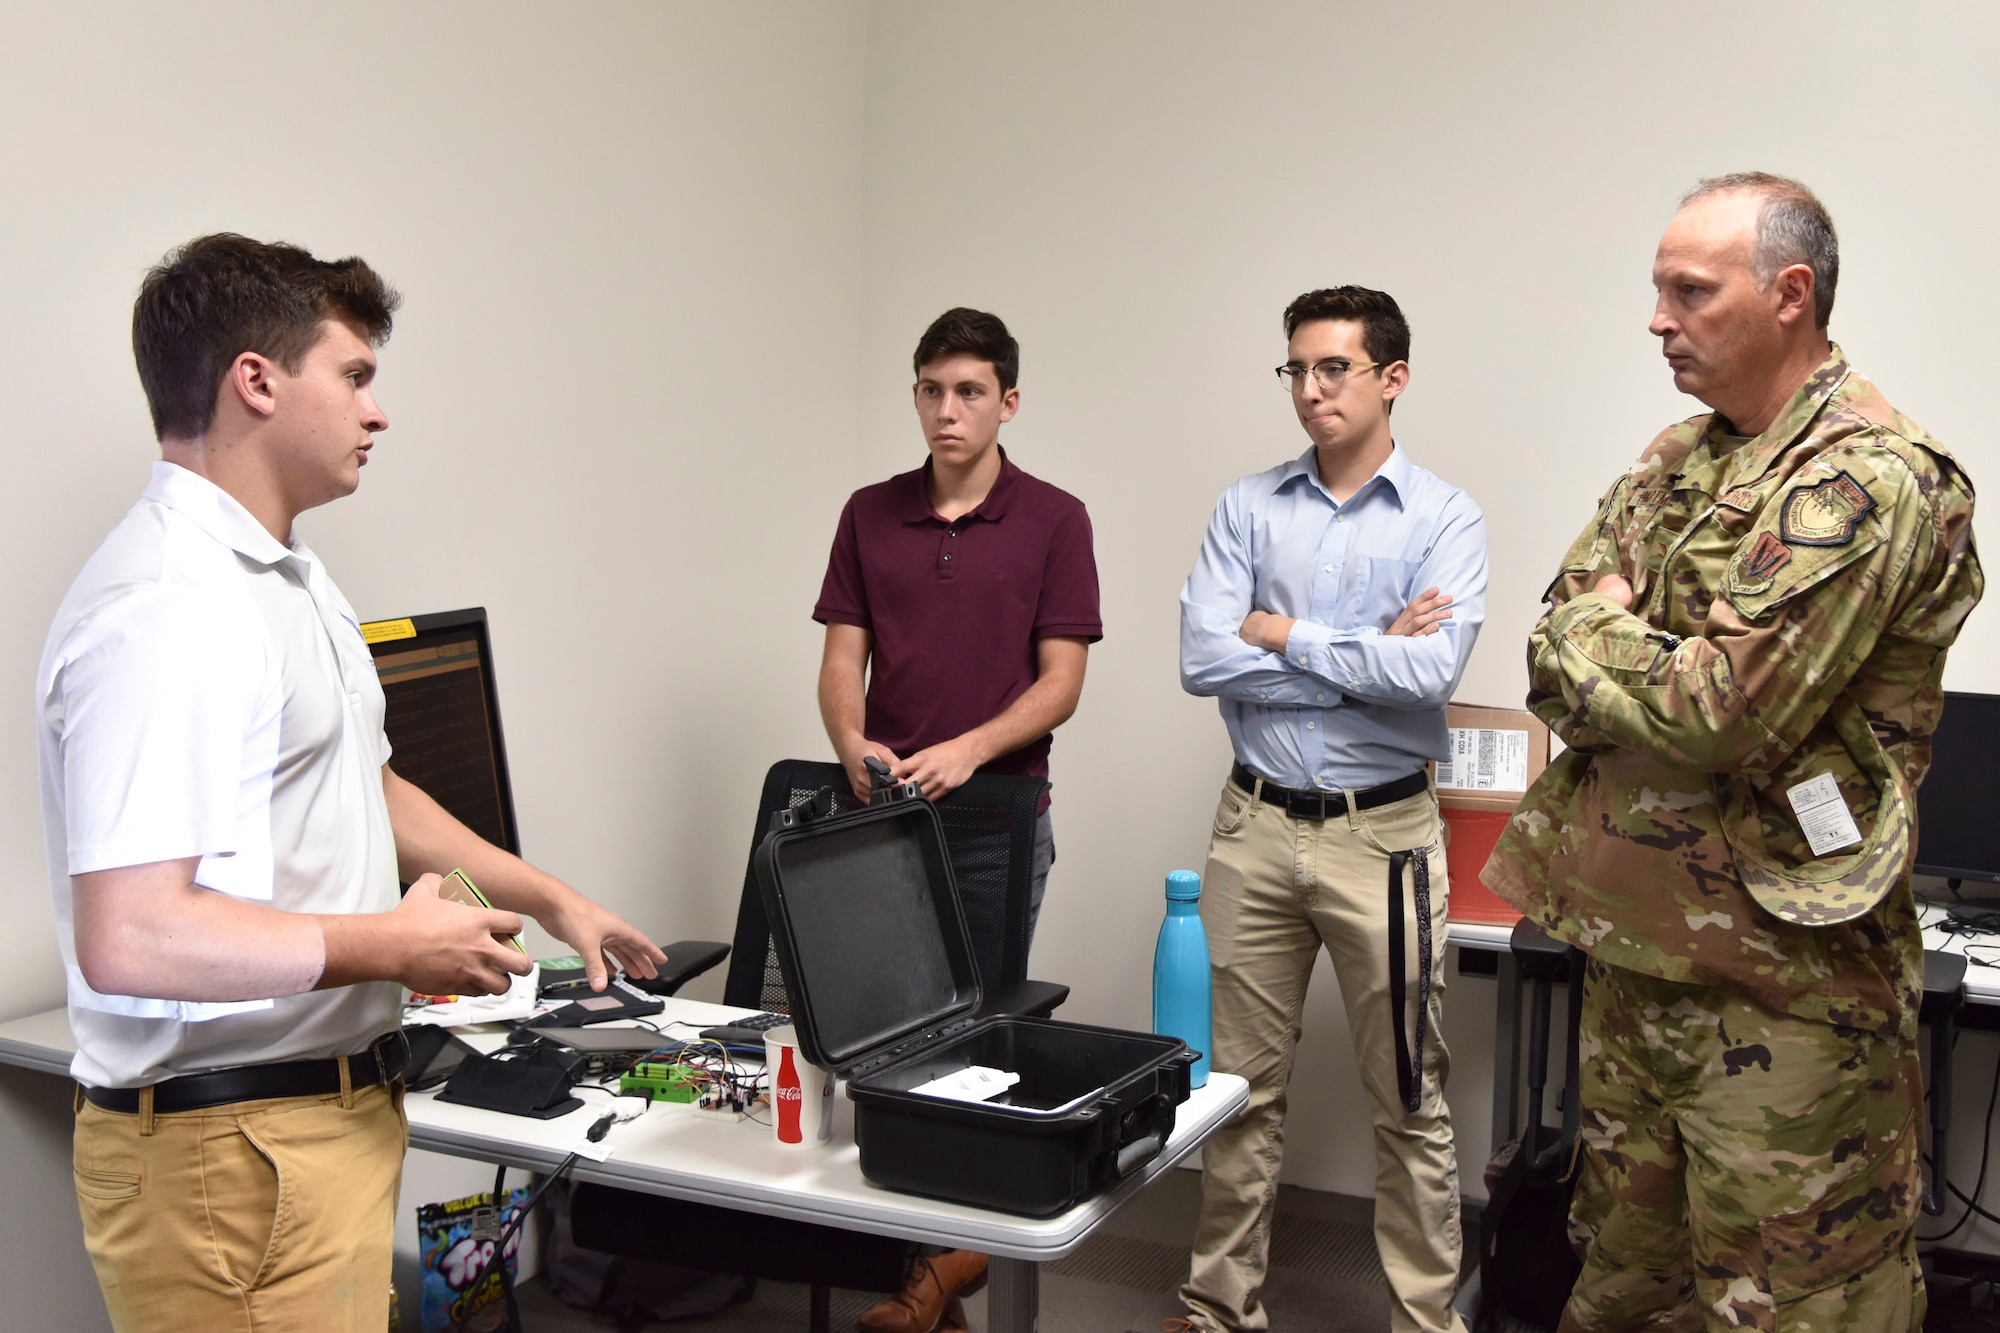 Matthew Santalla, a senior at Florida Polytechnic University majoring in Business Analytics and Quantitative Economics, briefs Col. Chad Hartman, commander of the Air Force Technical Applications Center, on a system he and four other university students developed during their X-Force summer fellowship with the nuclear treaty monitoring center at Cape Canaveral Air Force Station, Fla.  The program is sponsored by the National Security Innovation Network.  Pictured left to right:  Santalla; Andrew Bass, a freshman at Washington University in St. Louis;  Bryan Urias, a senior at Florida Polytechnic University; and Hartman. (U.S. Air Force photo by Matthew S. Jurgens)